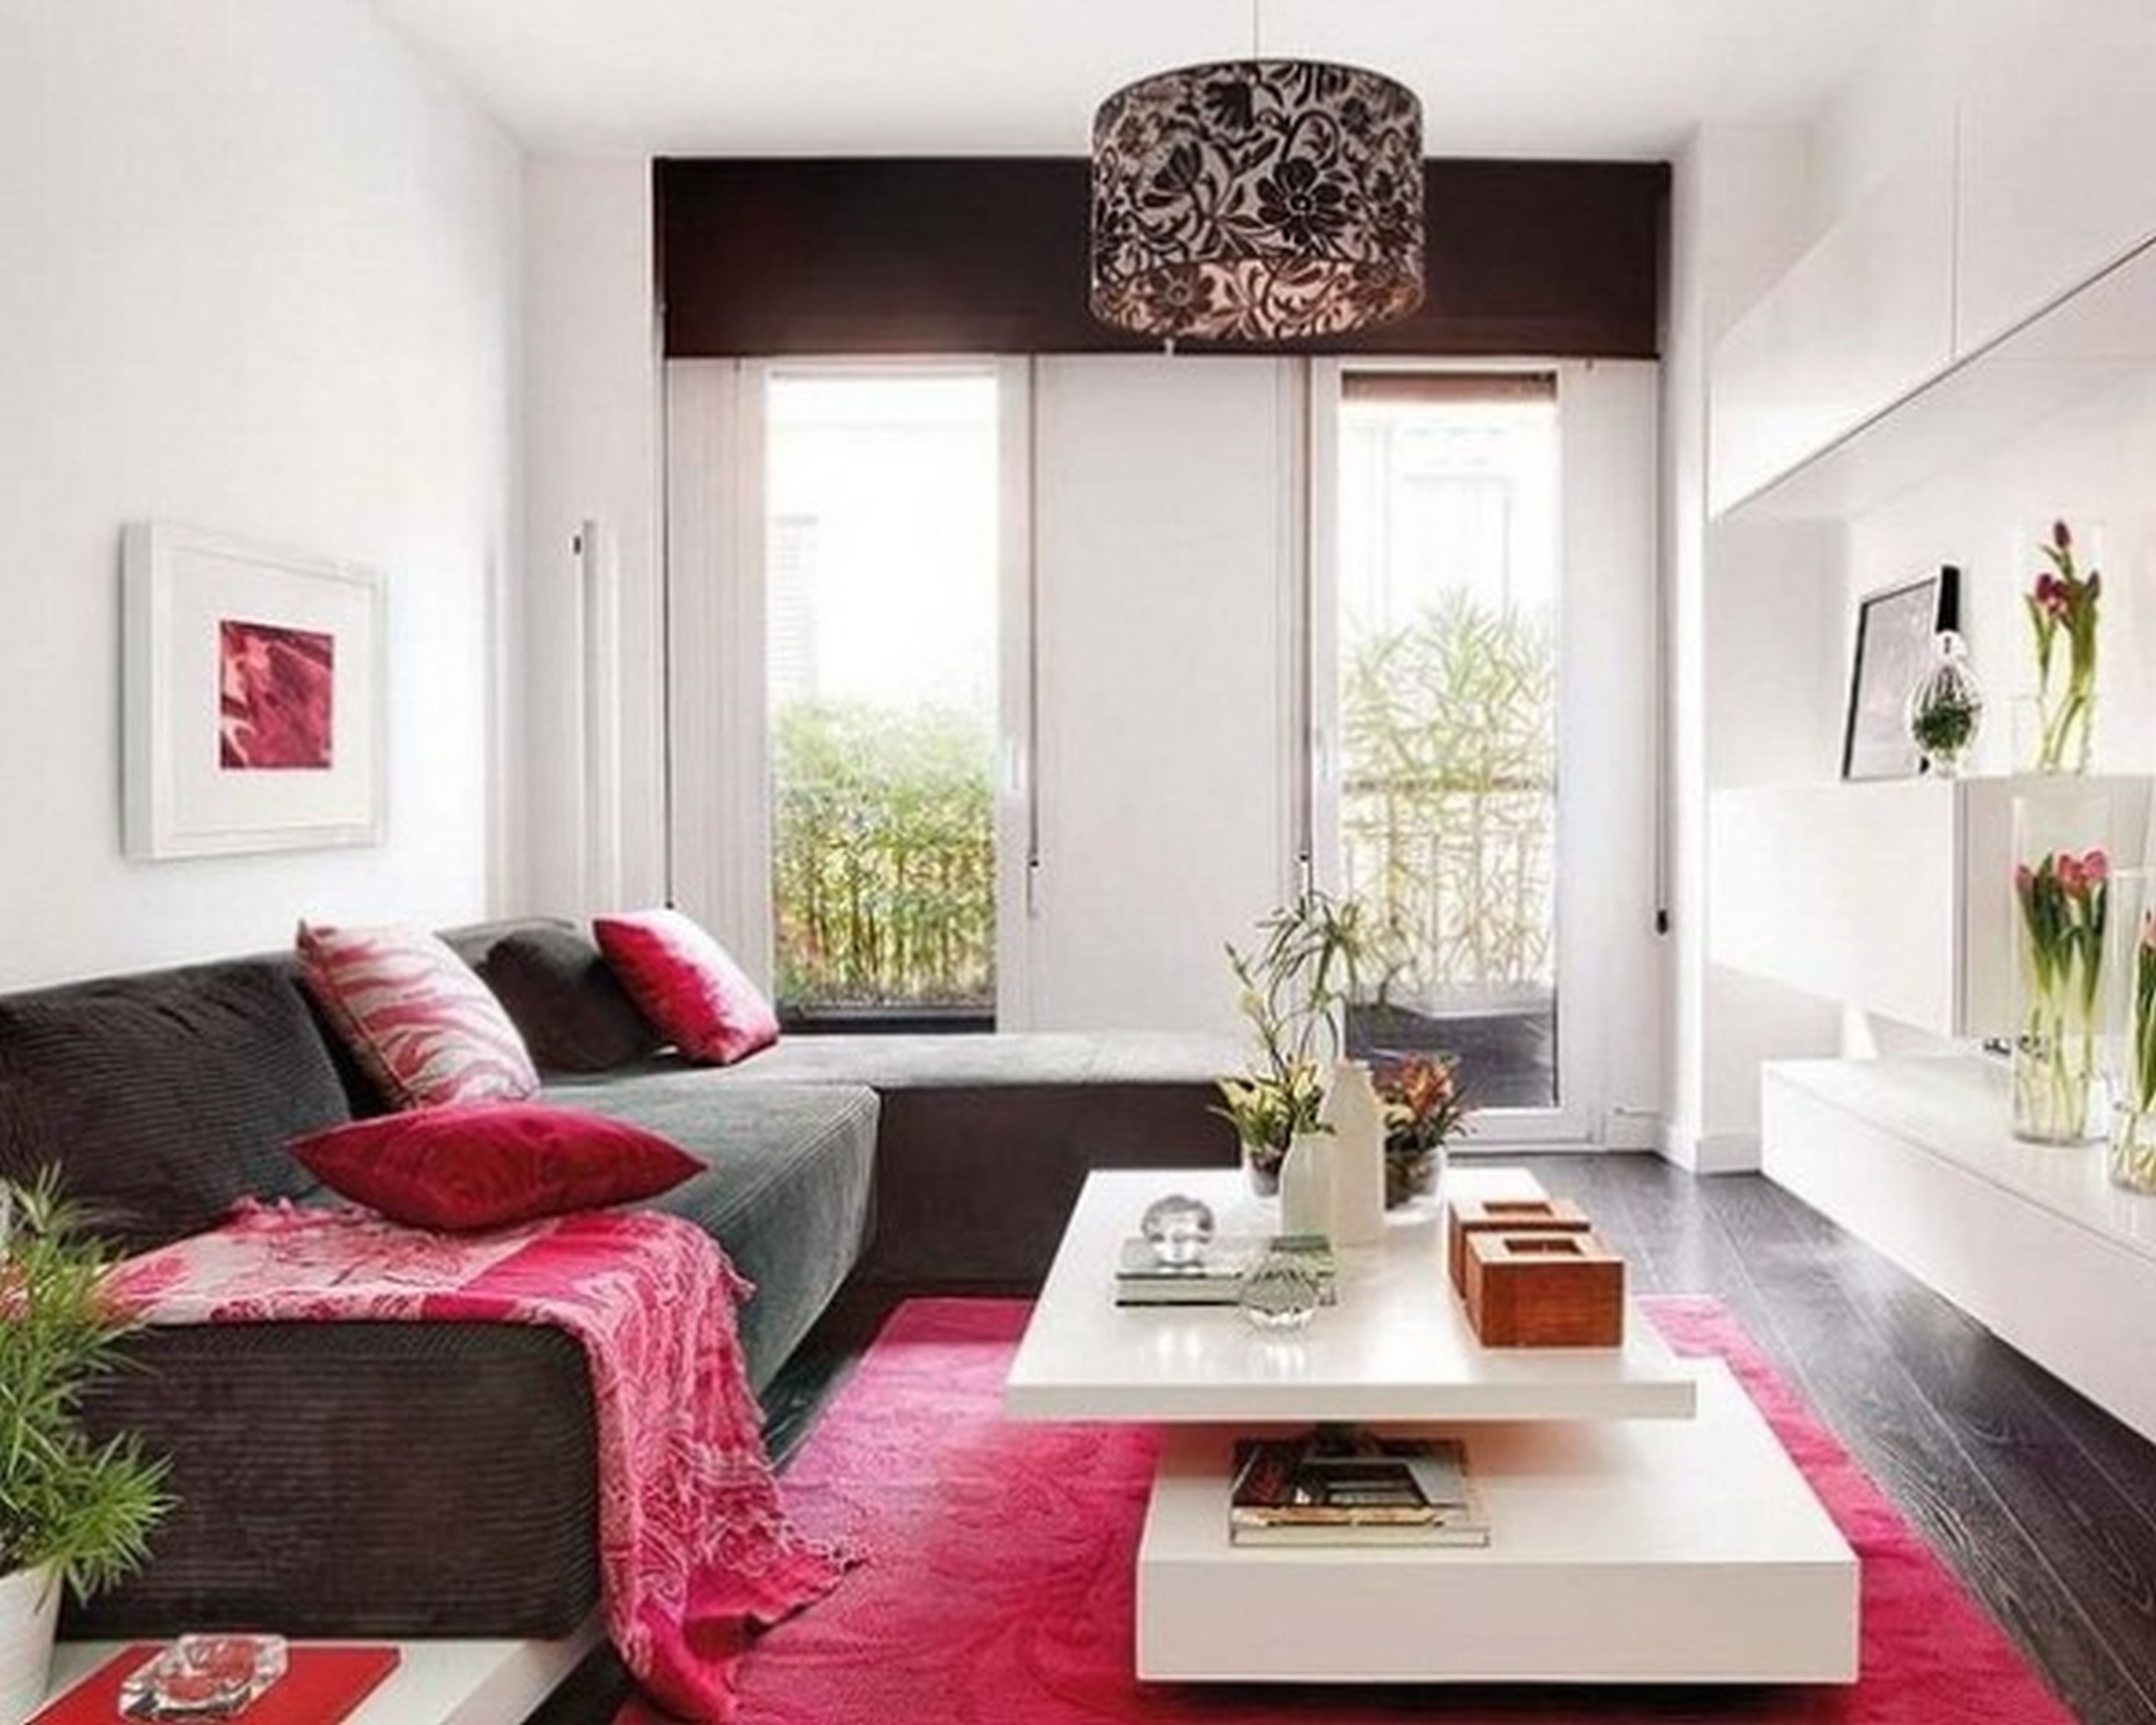 small-apartment-white-small-living-room-with-grey-sofa-and-red-rug-fur-also-white-table-and-shelves